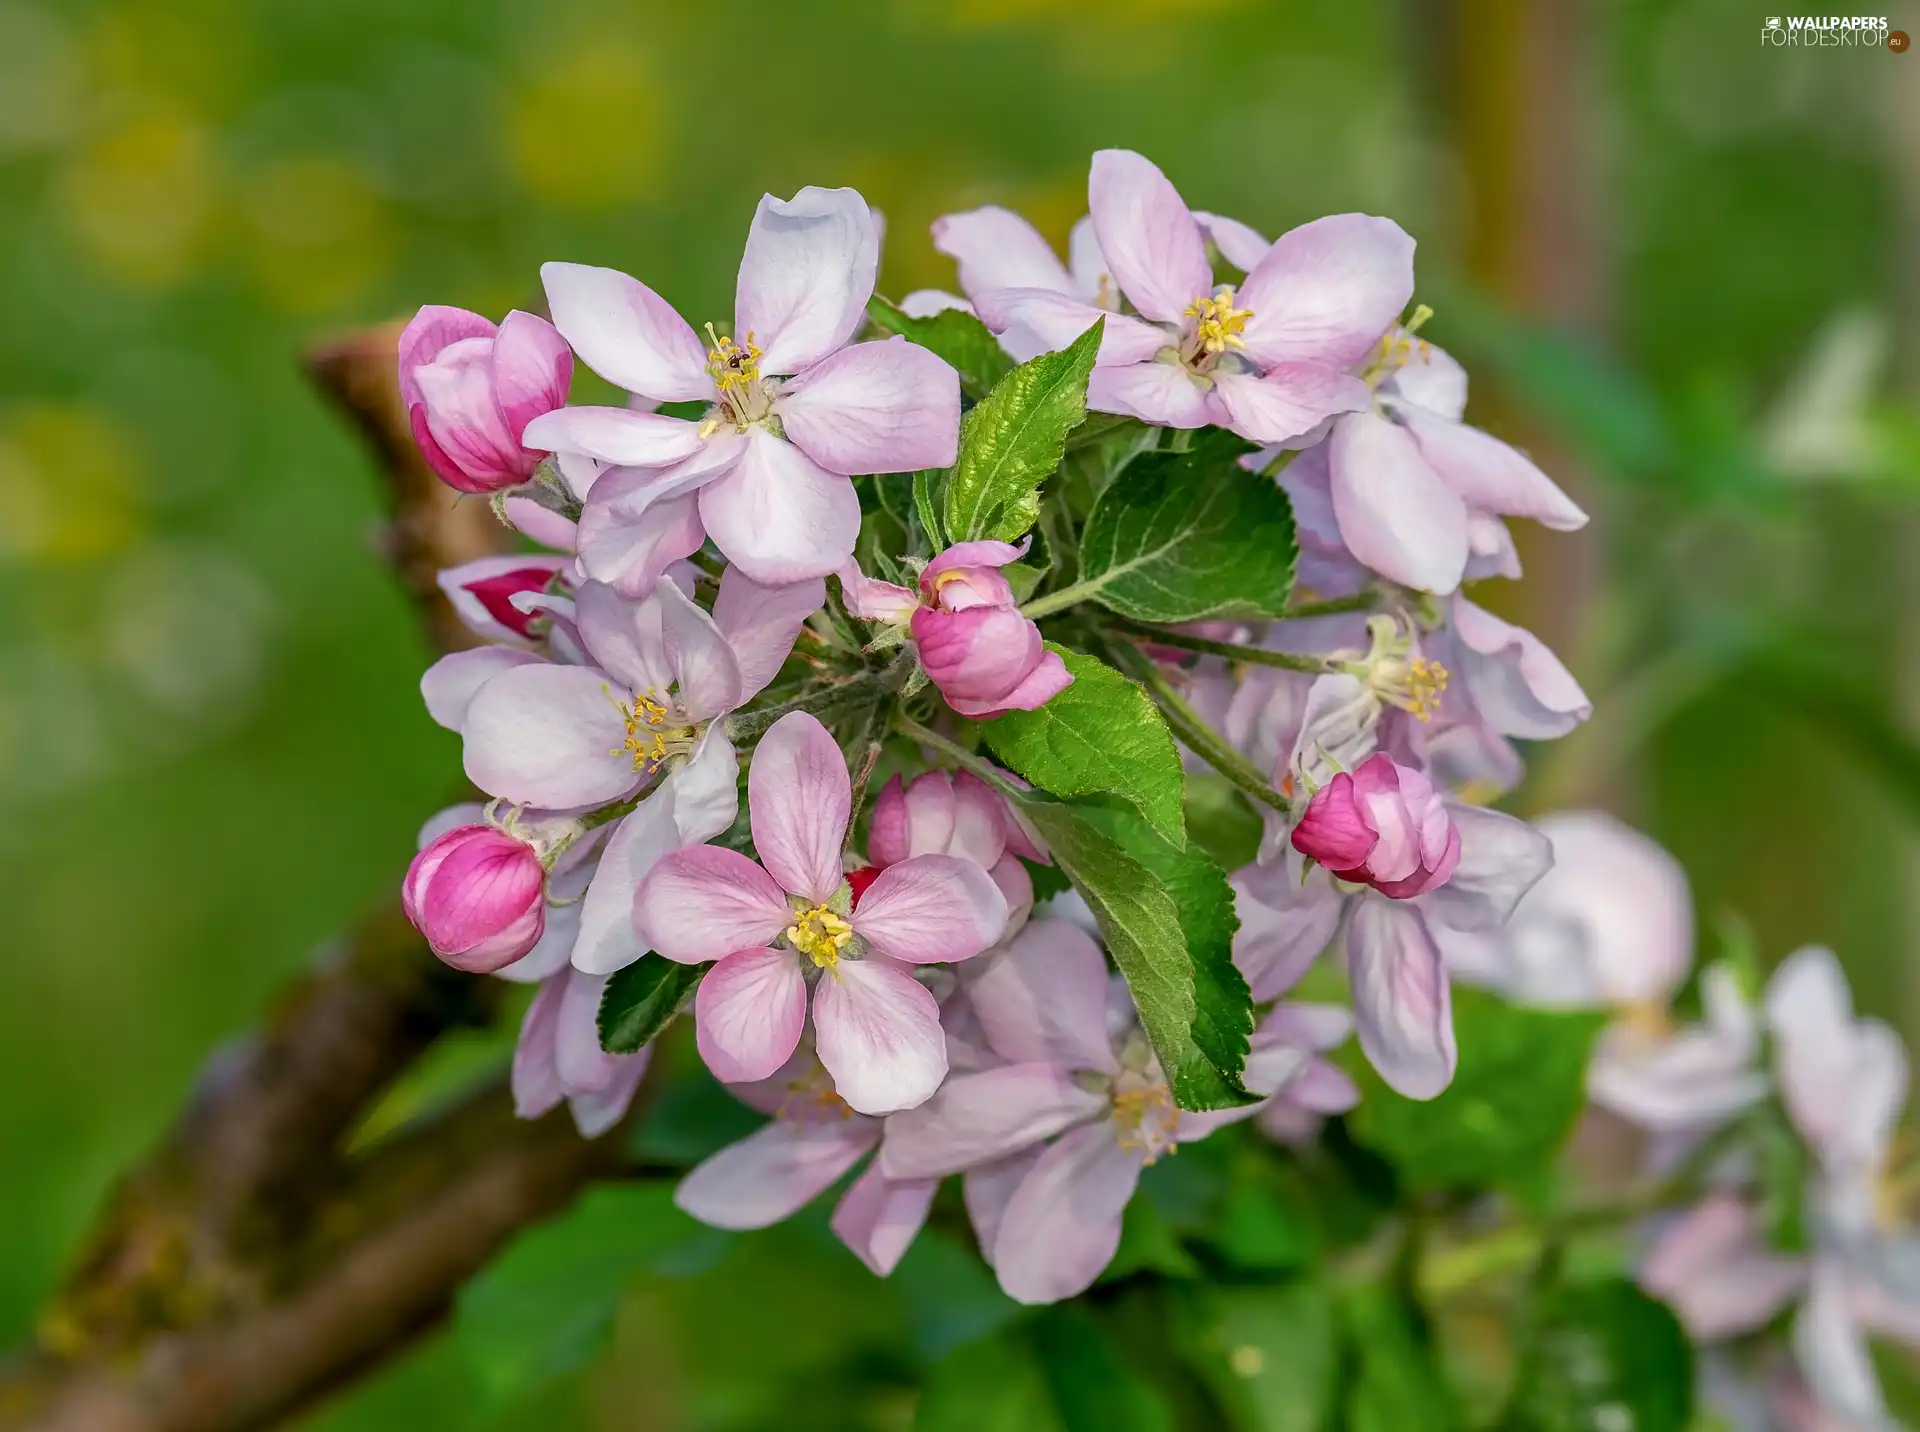 Blossoming, apple-tree, blurry background, twig